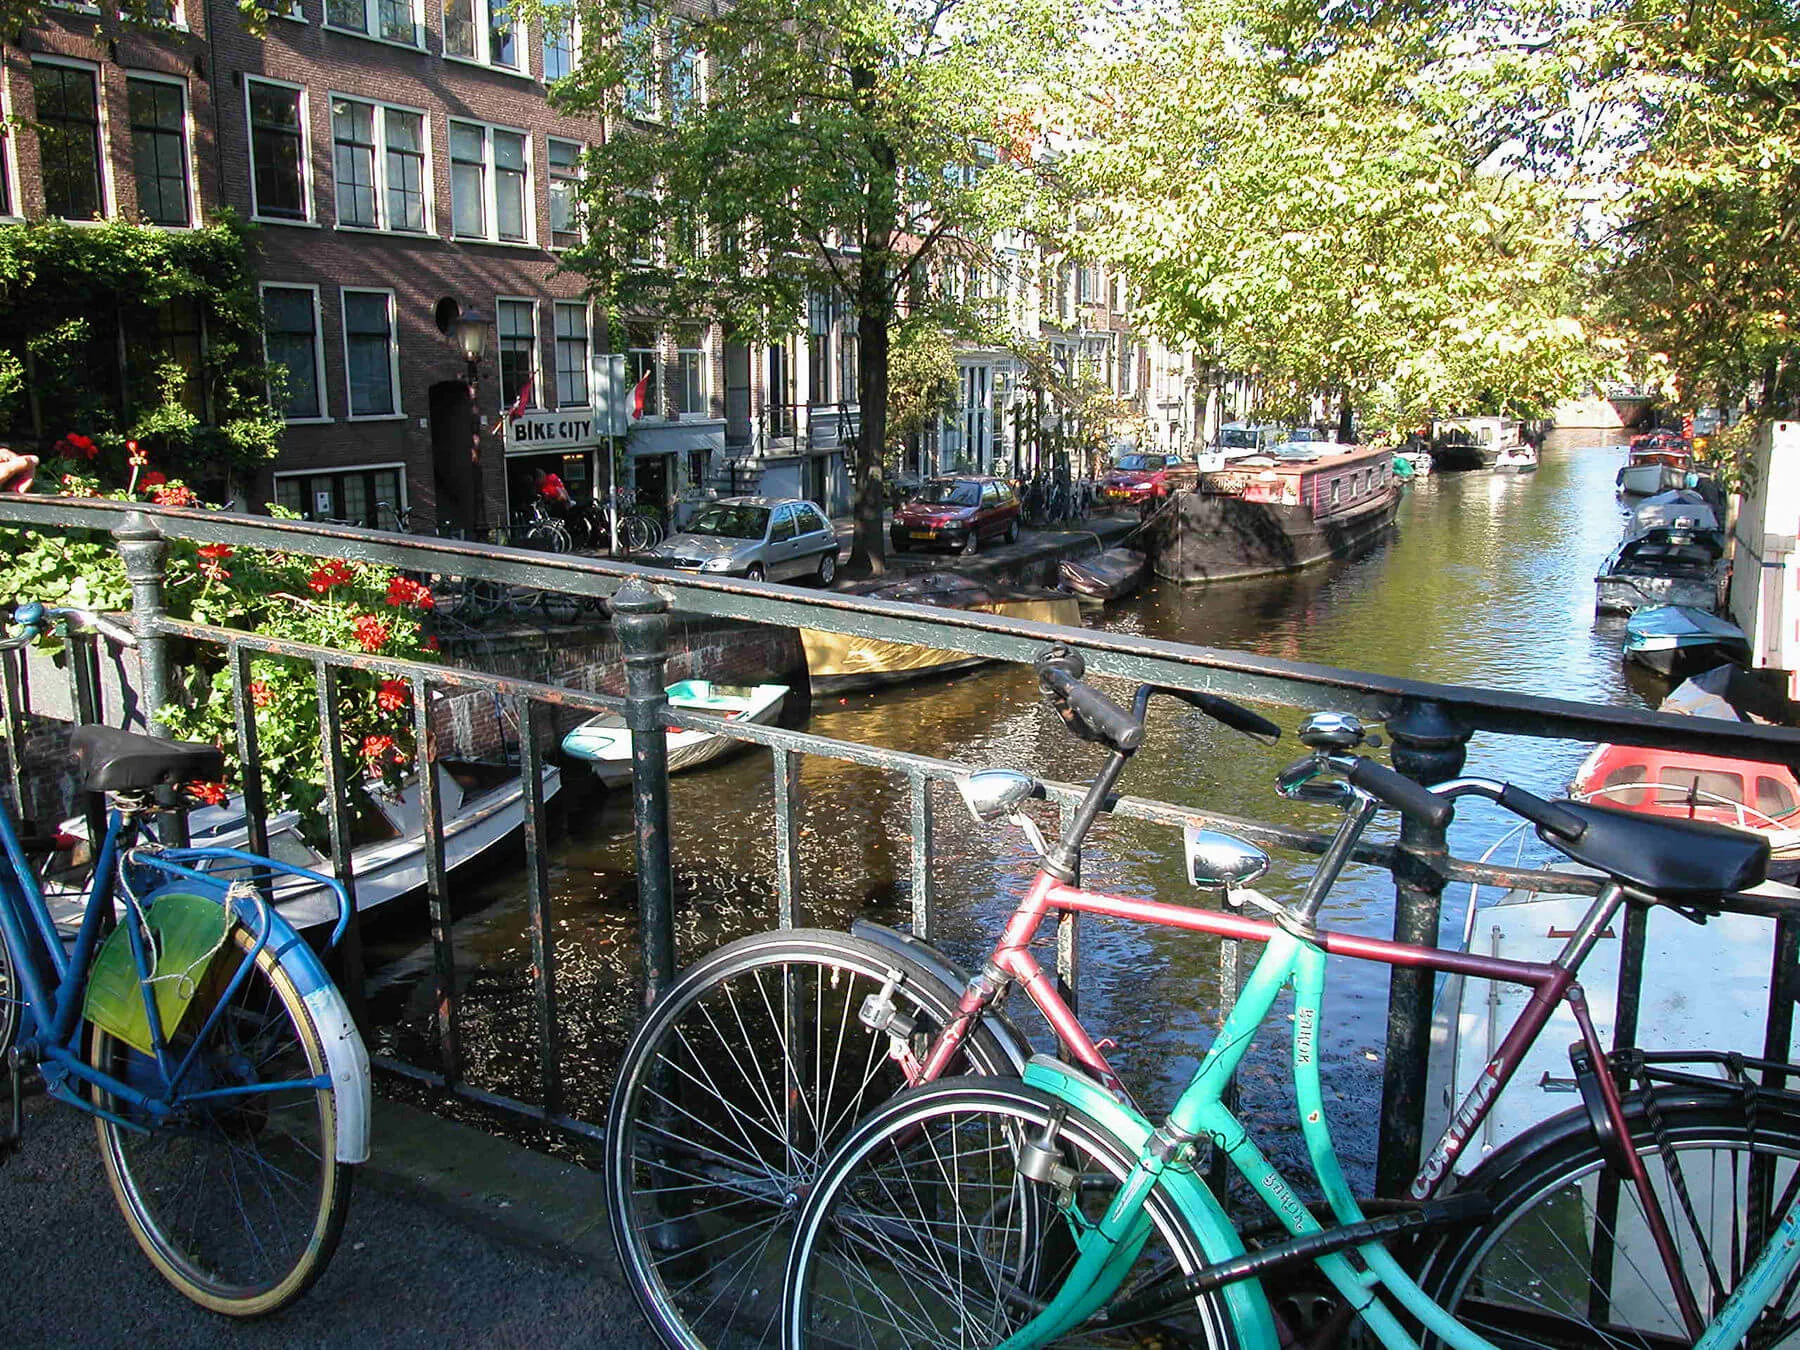 Pedal your way around town to take in copious canal views